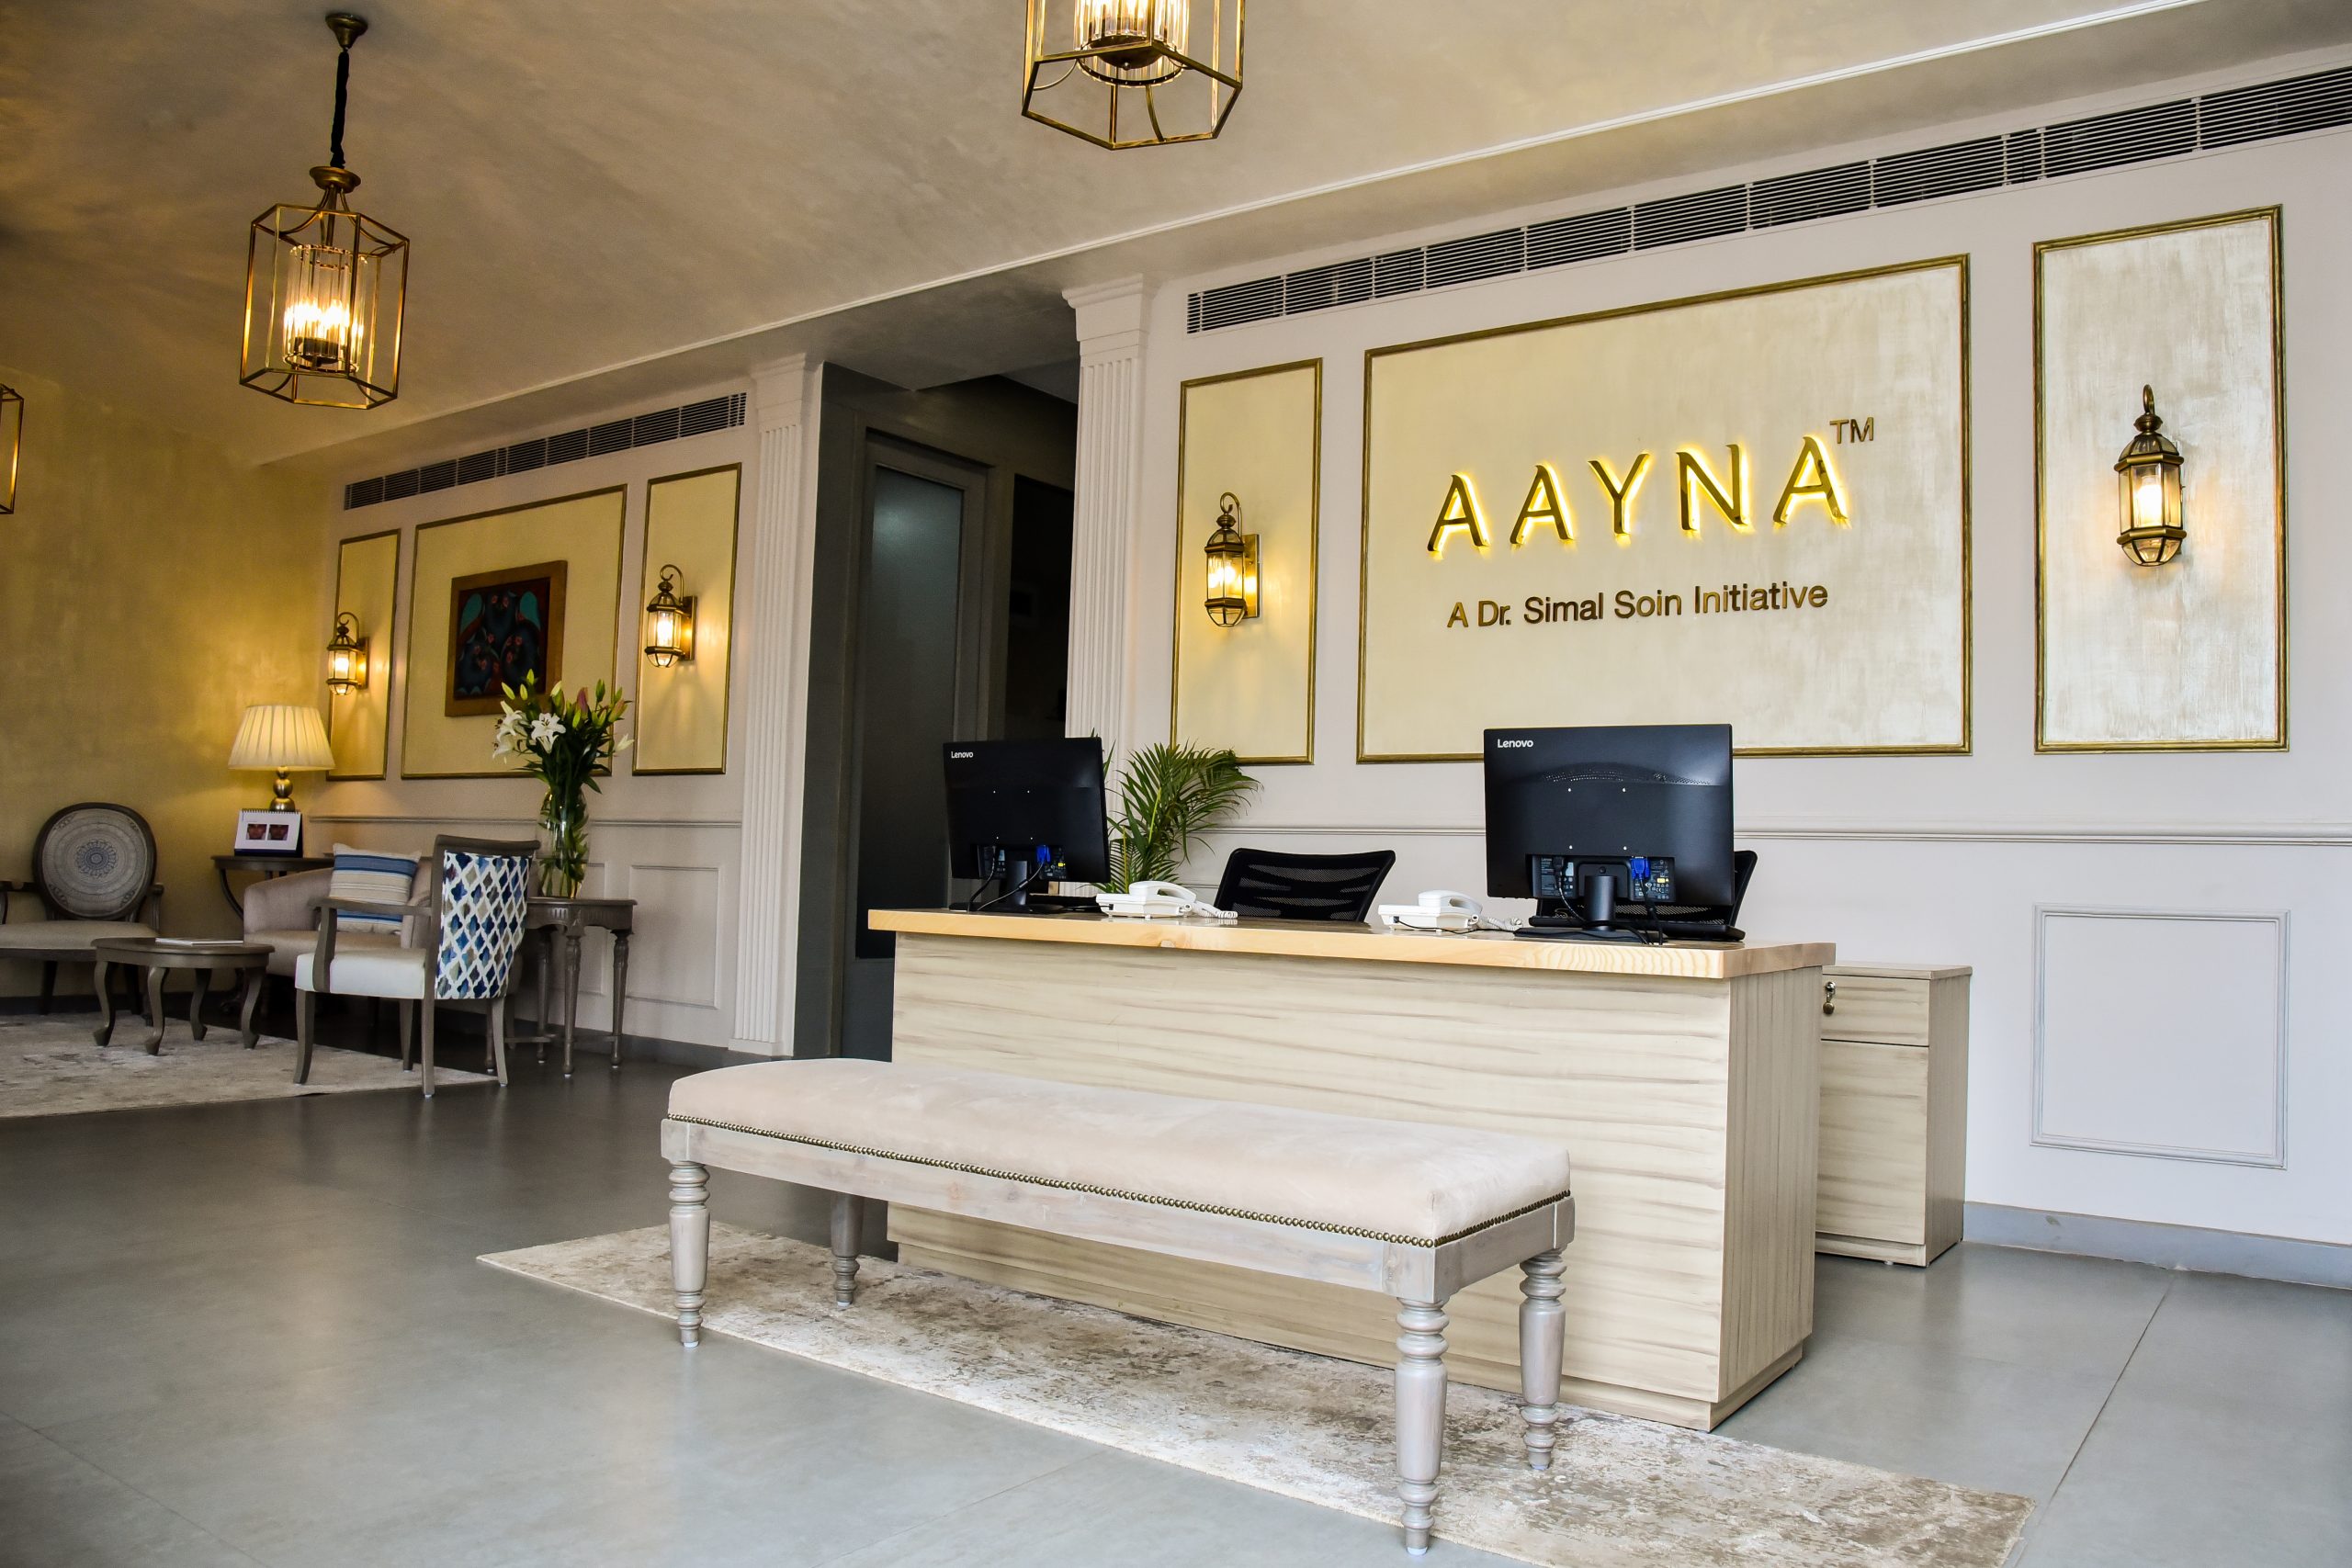 AAYNA- The Science of Beauty